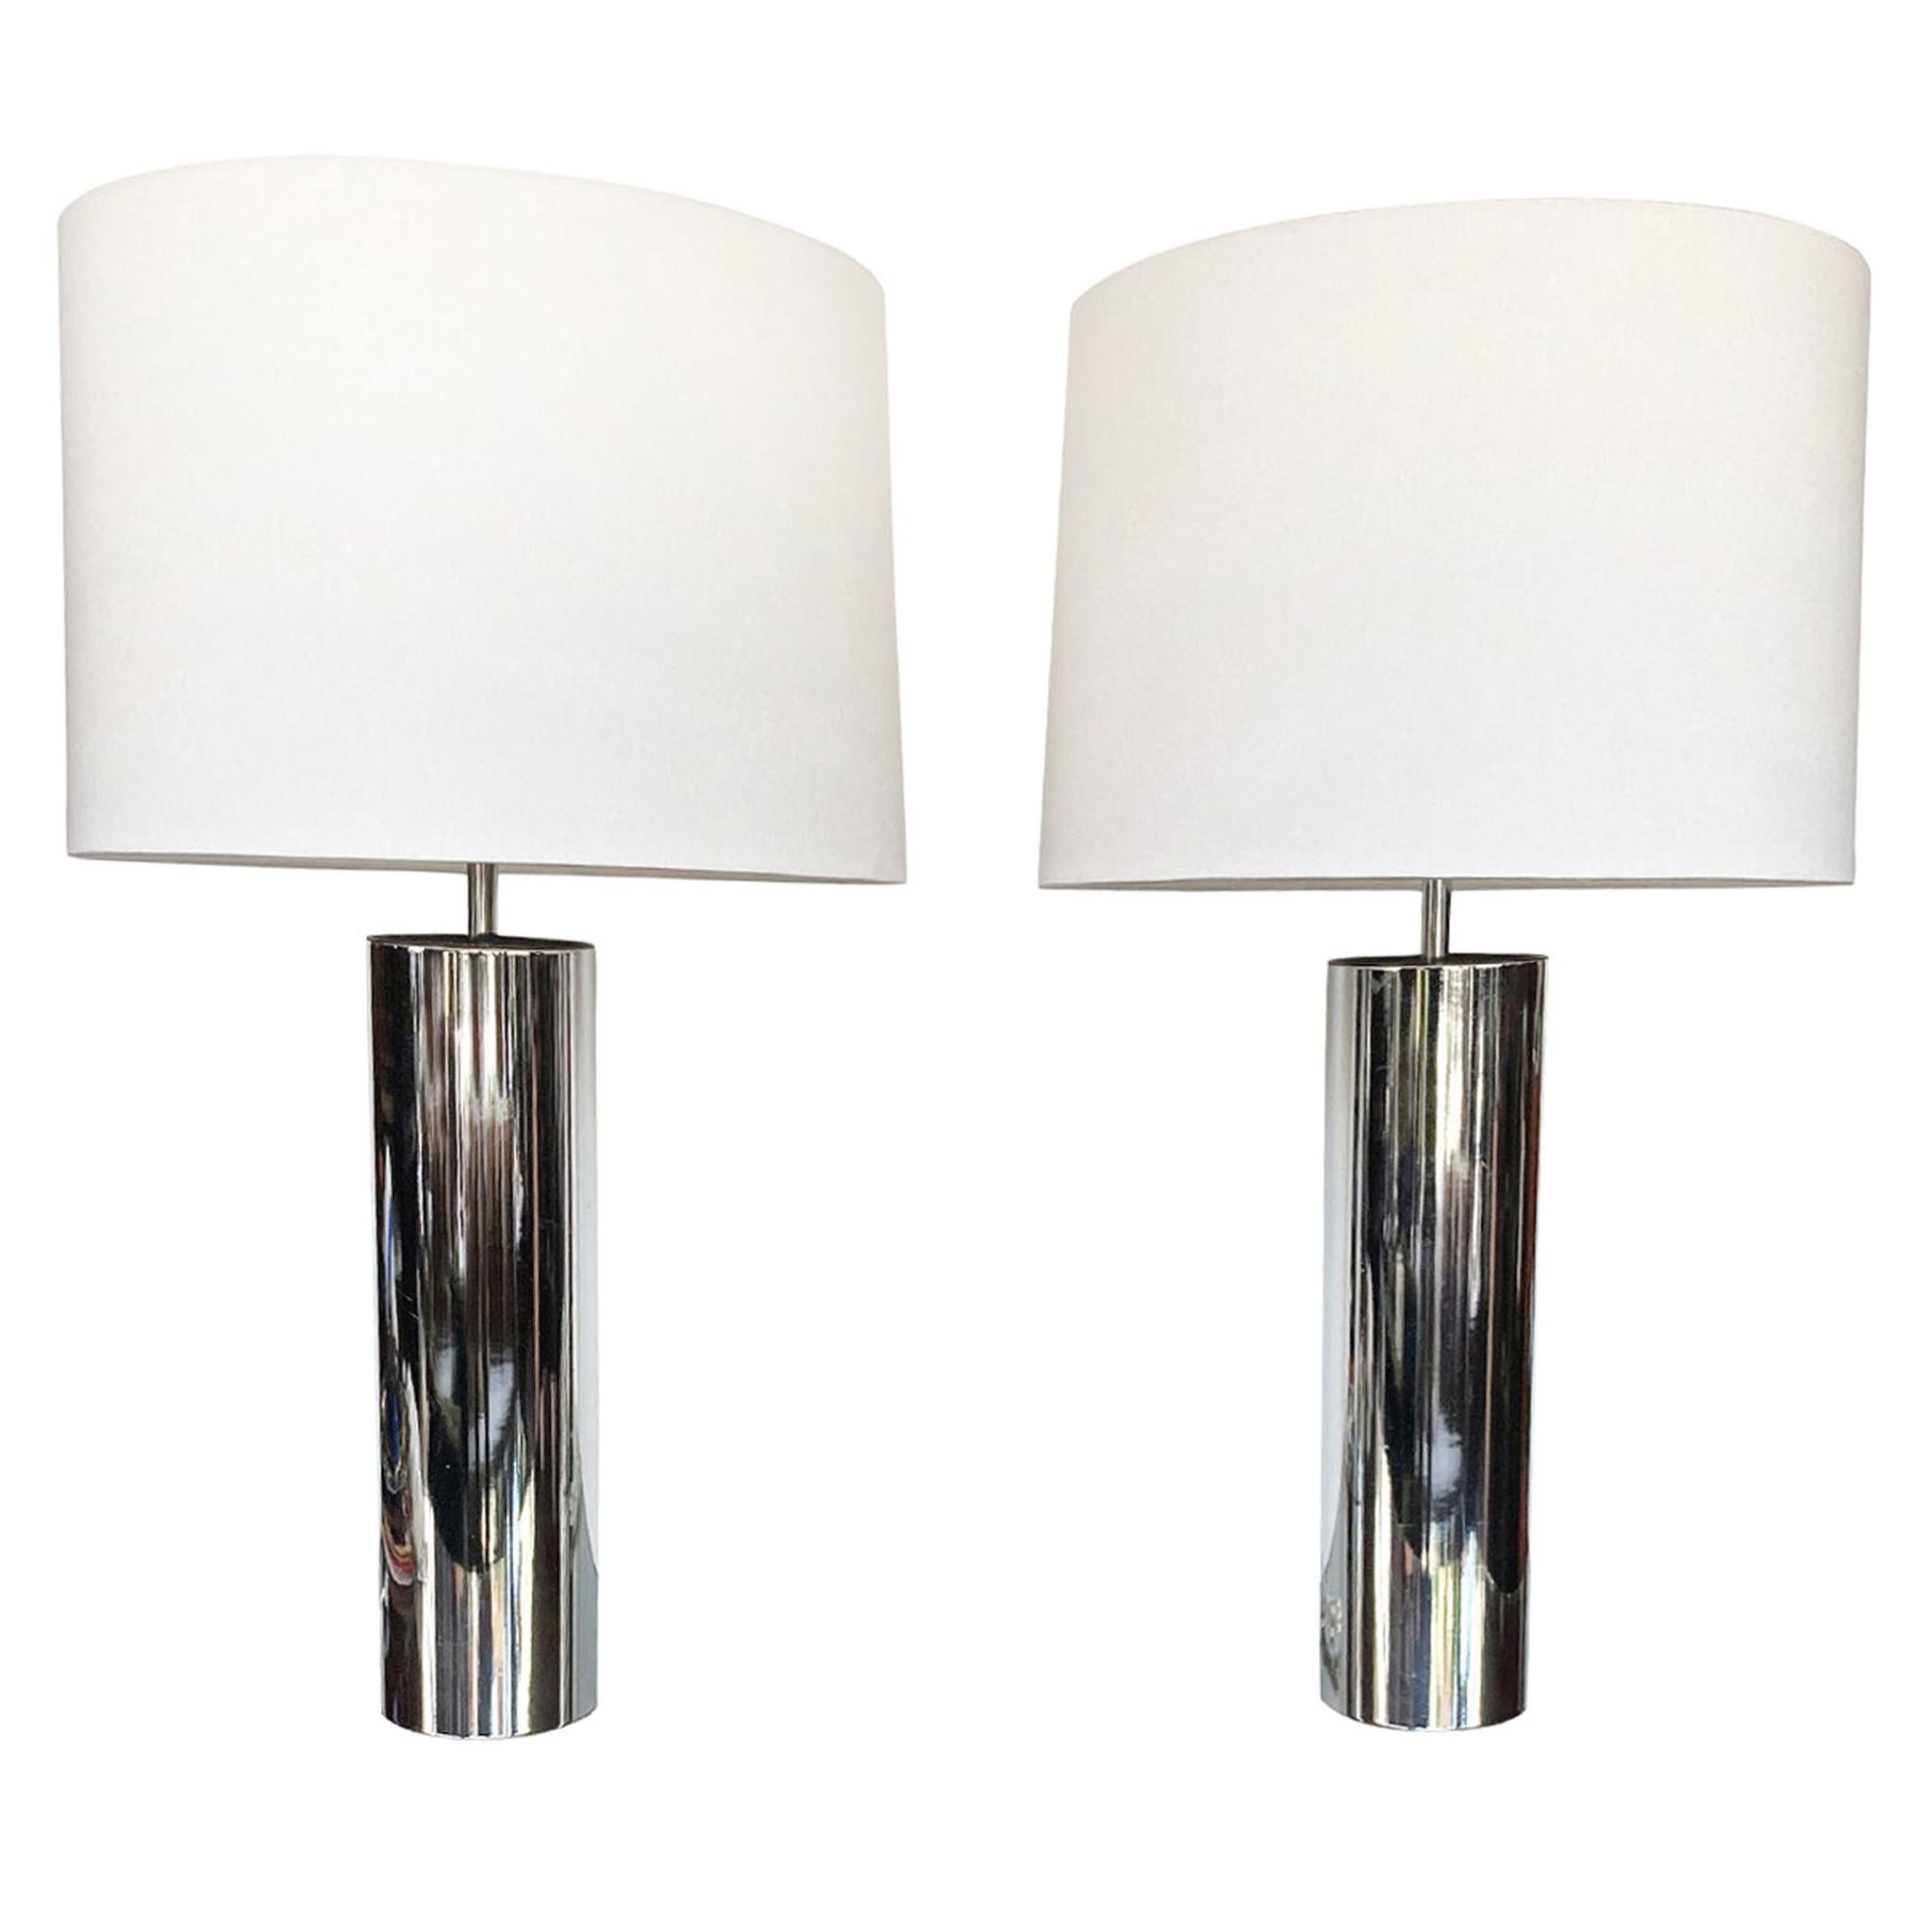 Pair of 1970s Chrome Cylinder Table Lamps Attributed to George Kovacs